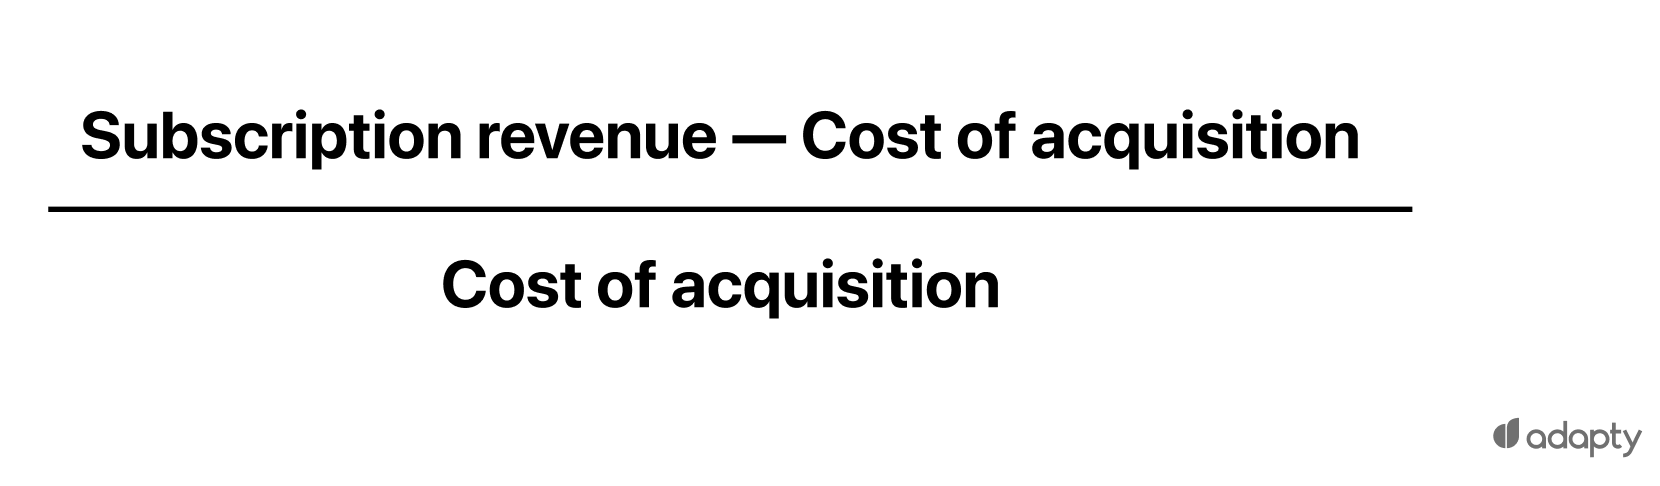 (Subscription revenue — Cost of acquisition) / (Cost of acquisition)